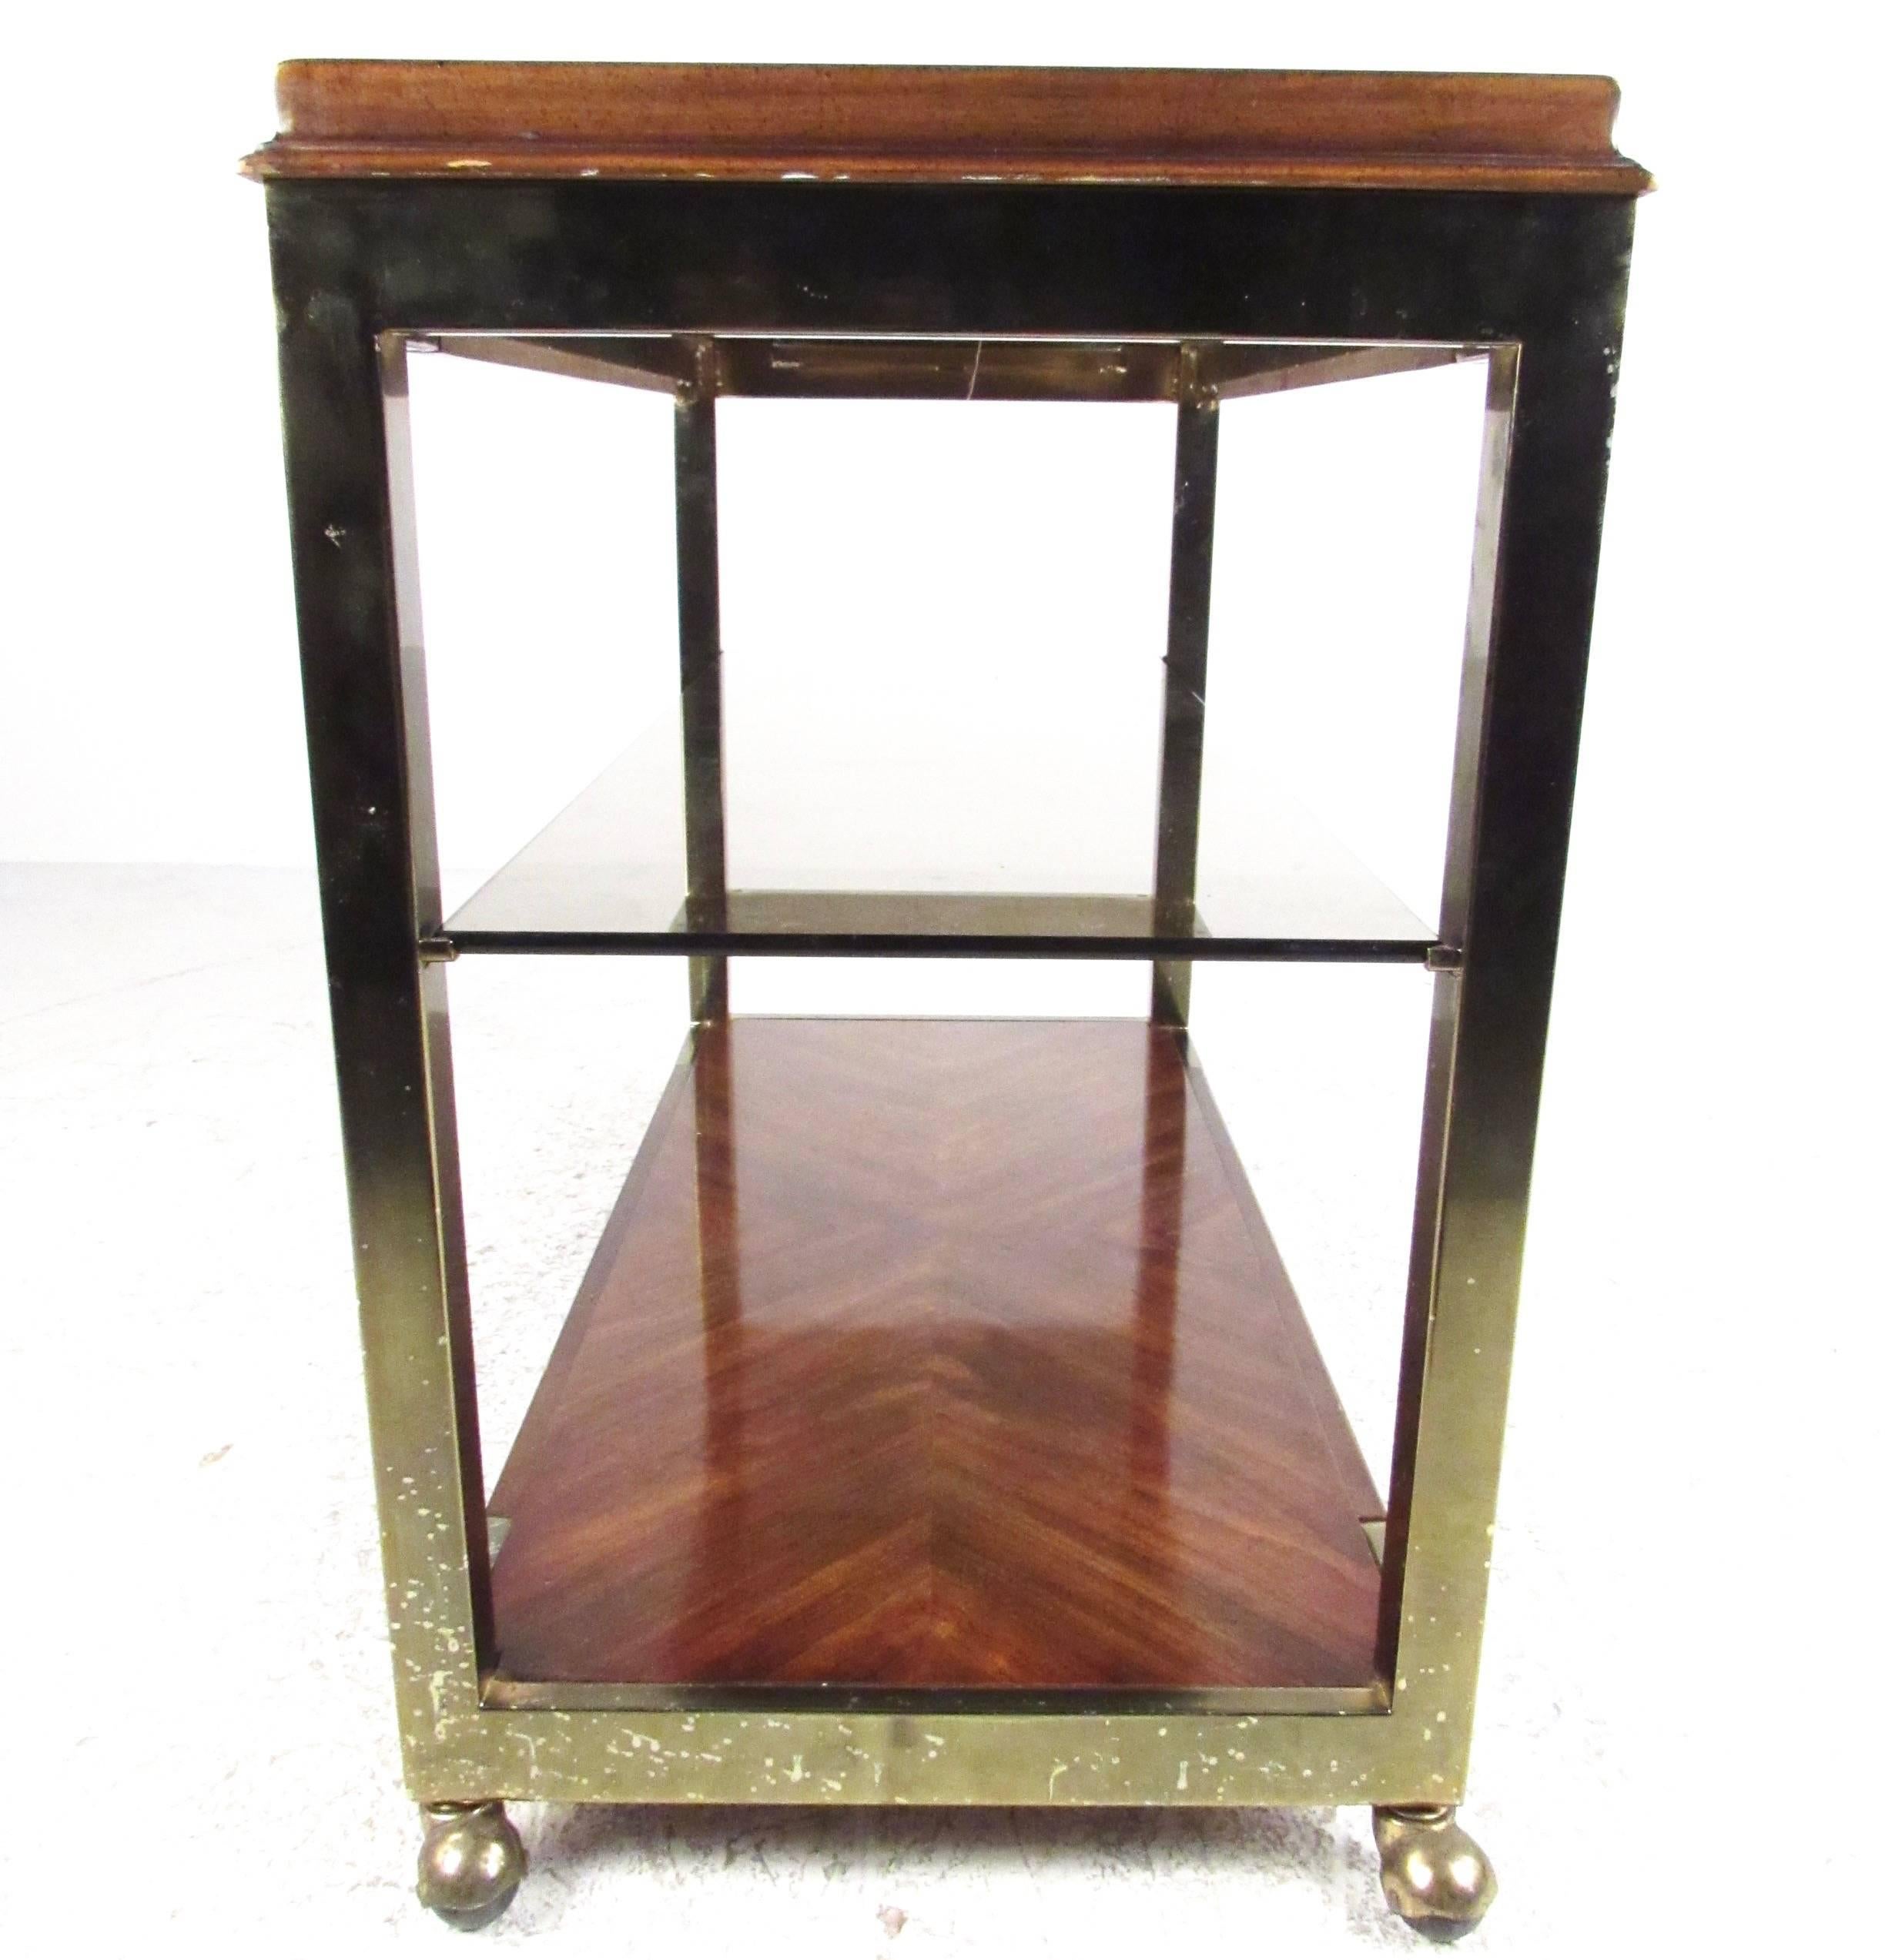 American Vintage Two-Tier Service Cart by Drexel Heritage